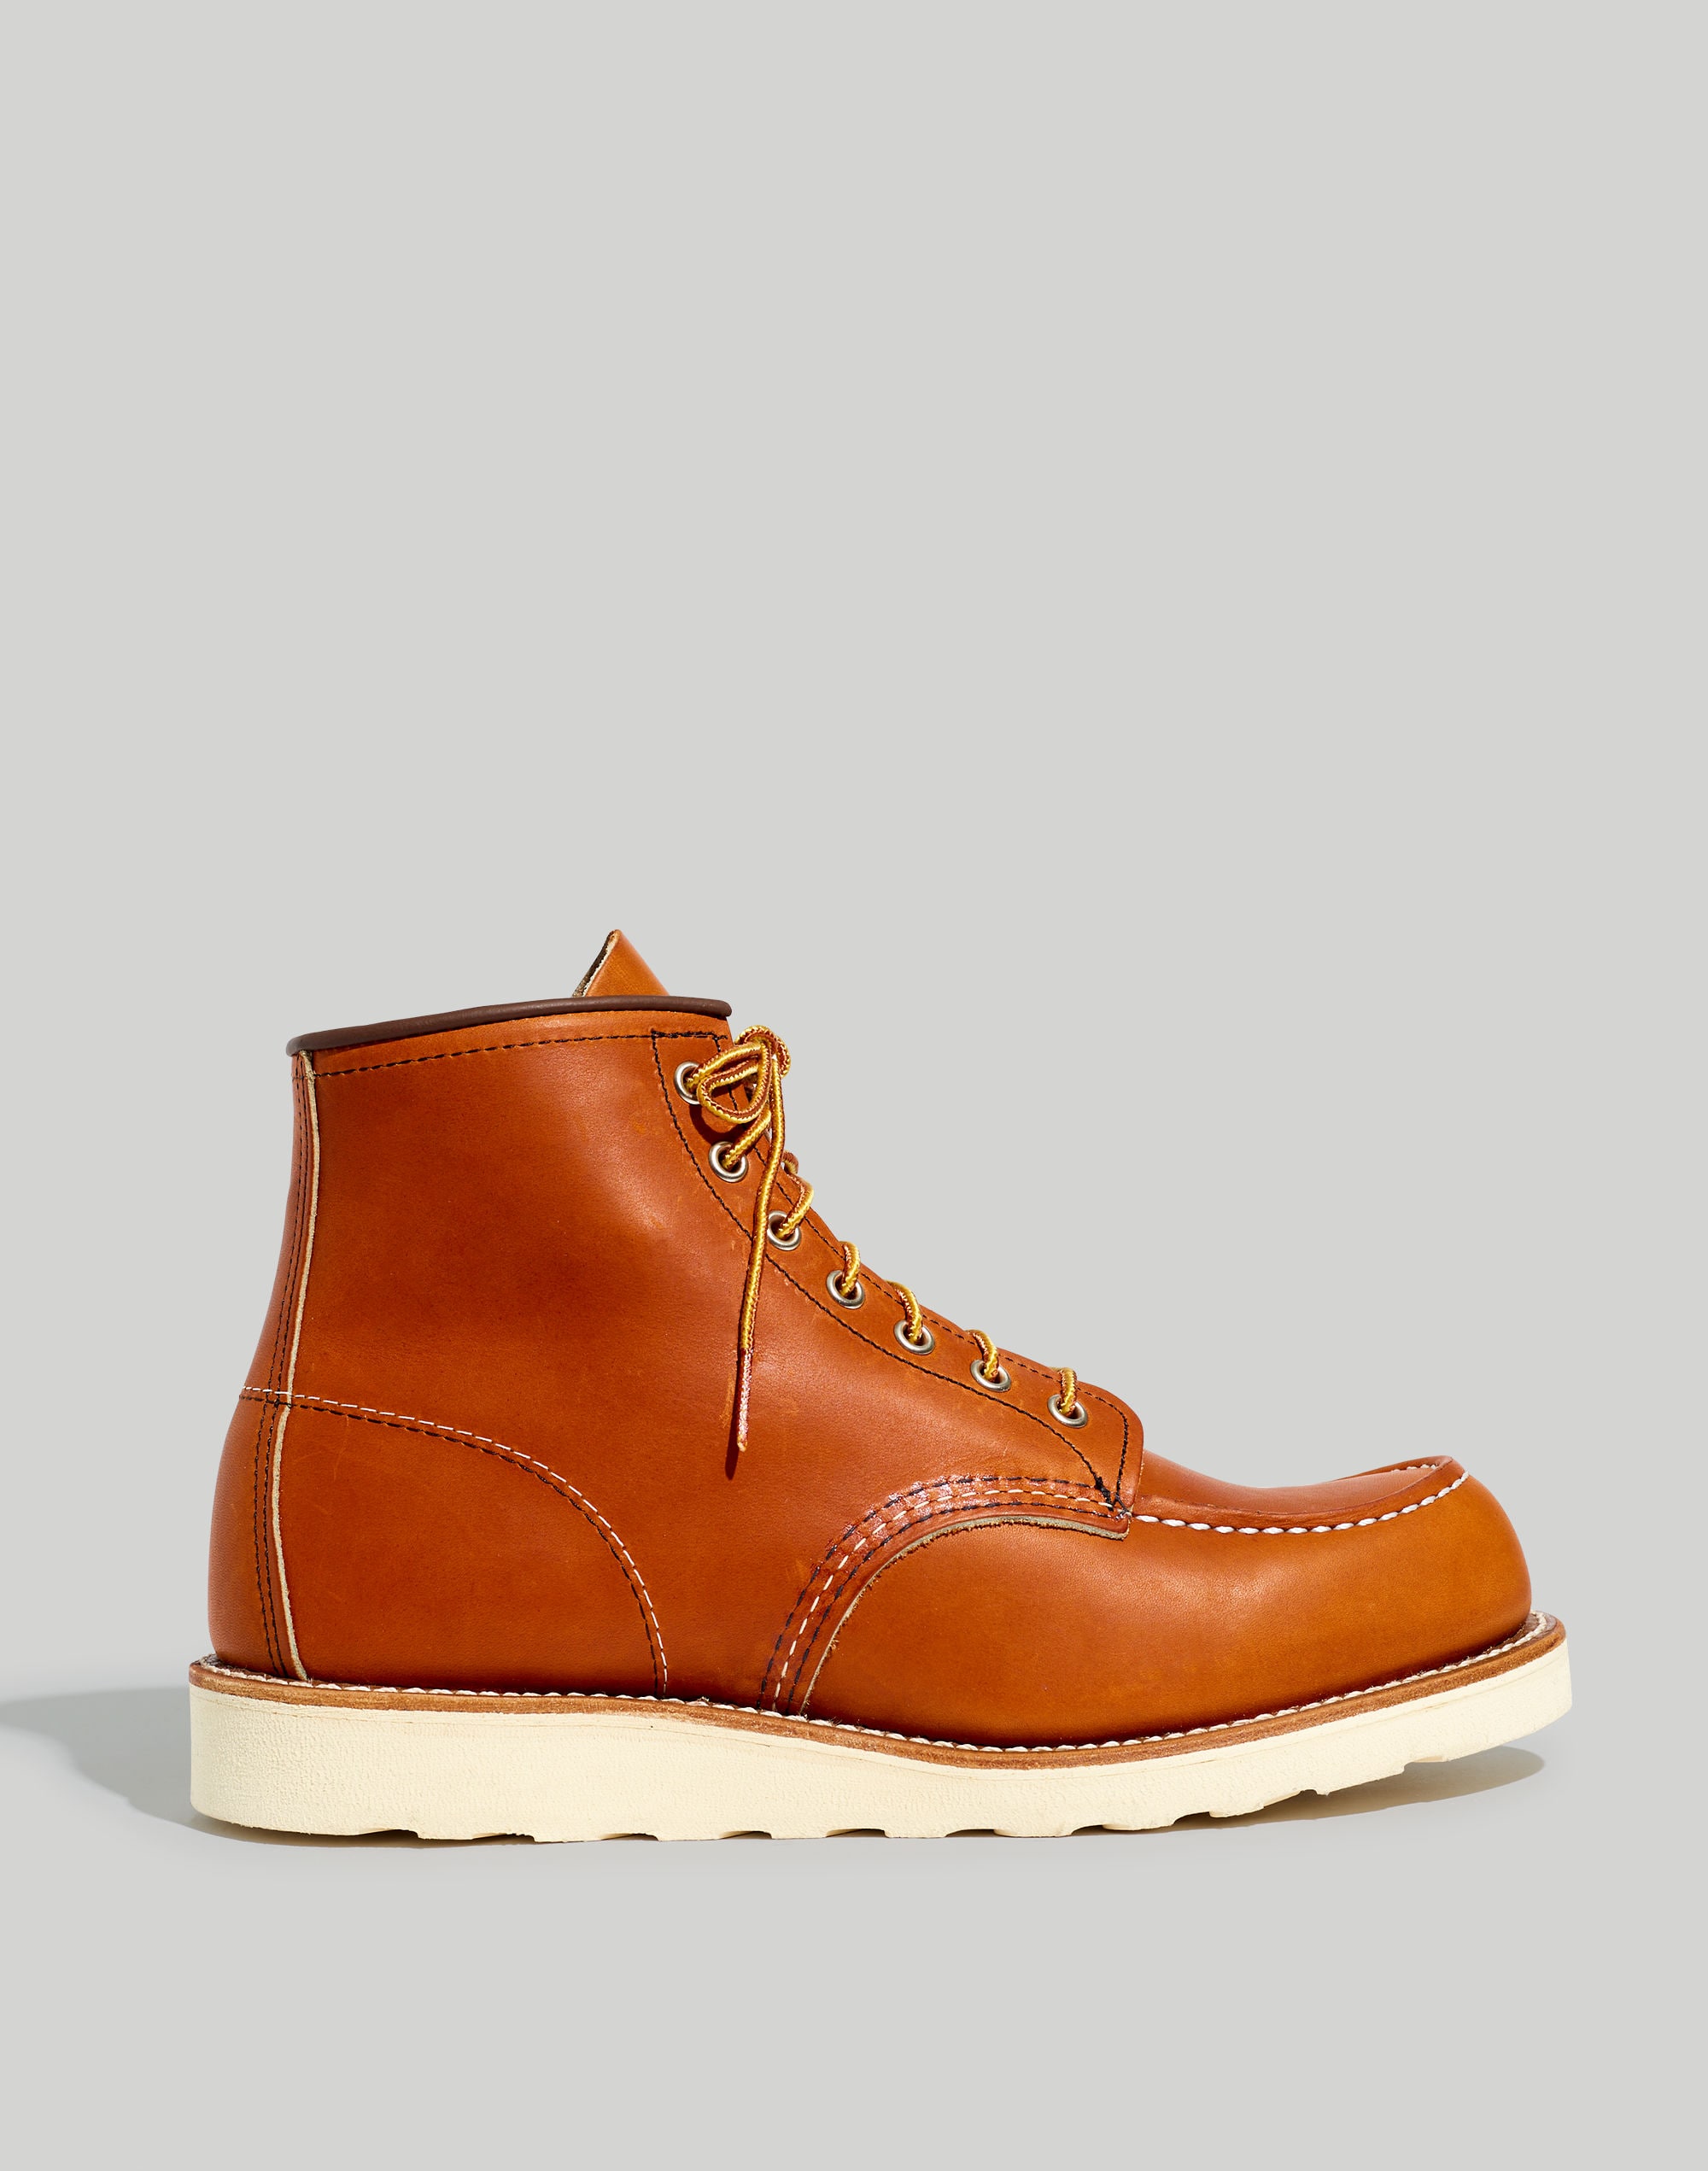 Red Wing Women's 6 Classic Moc Toe Boot